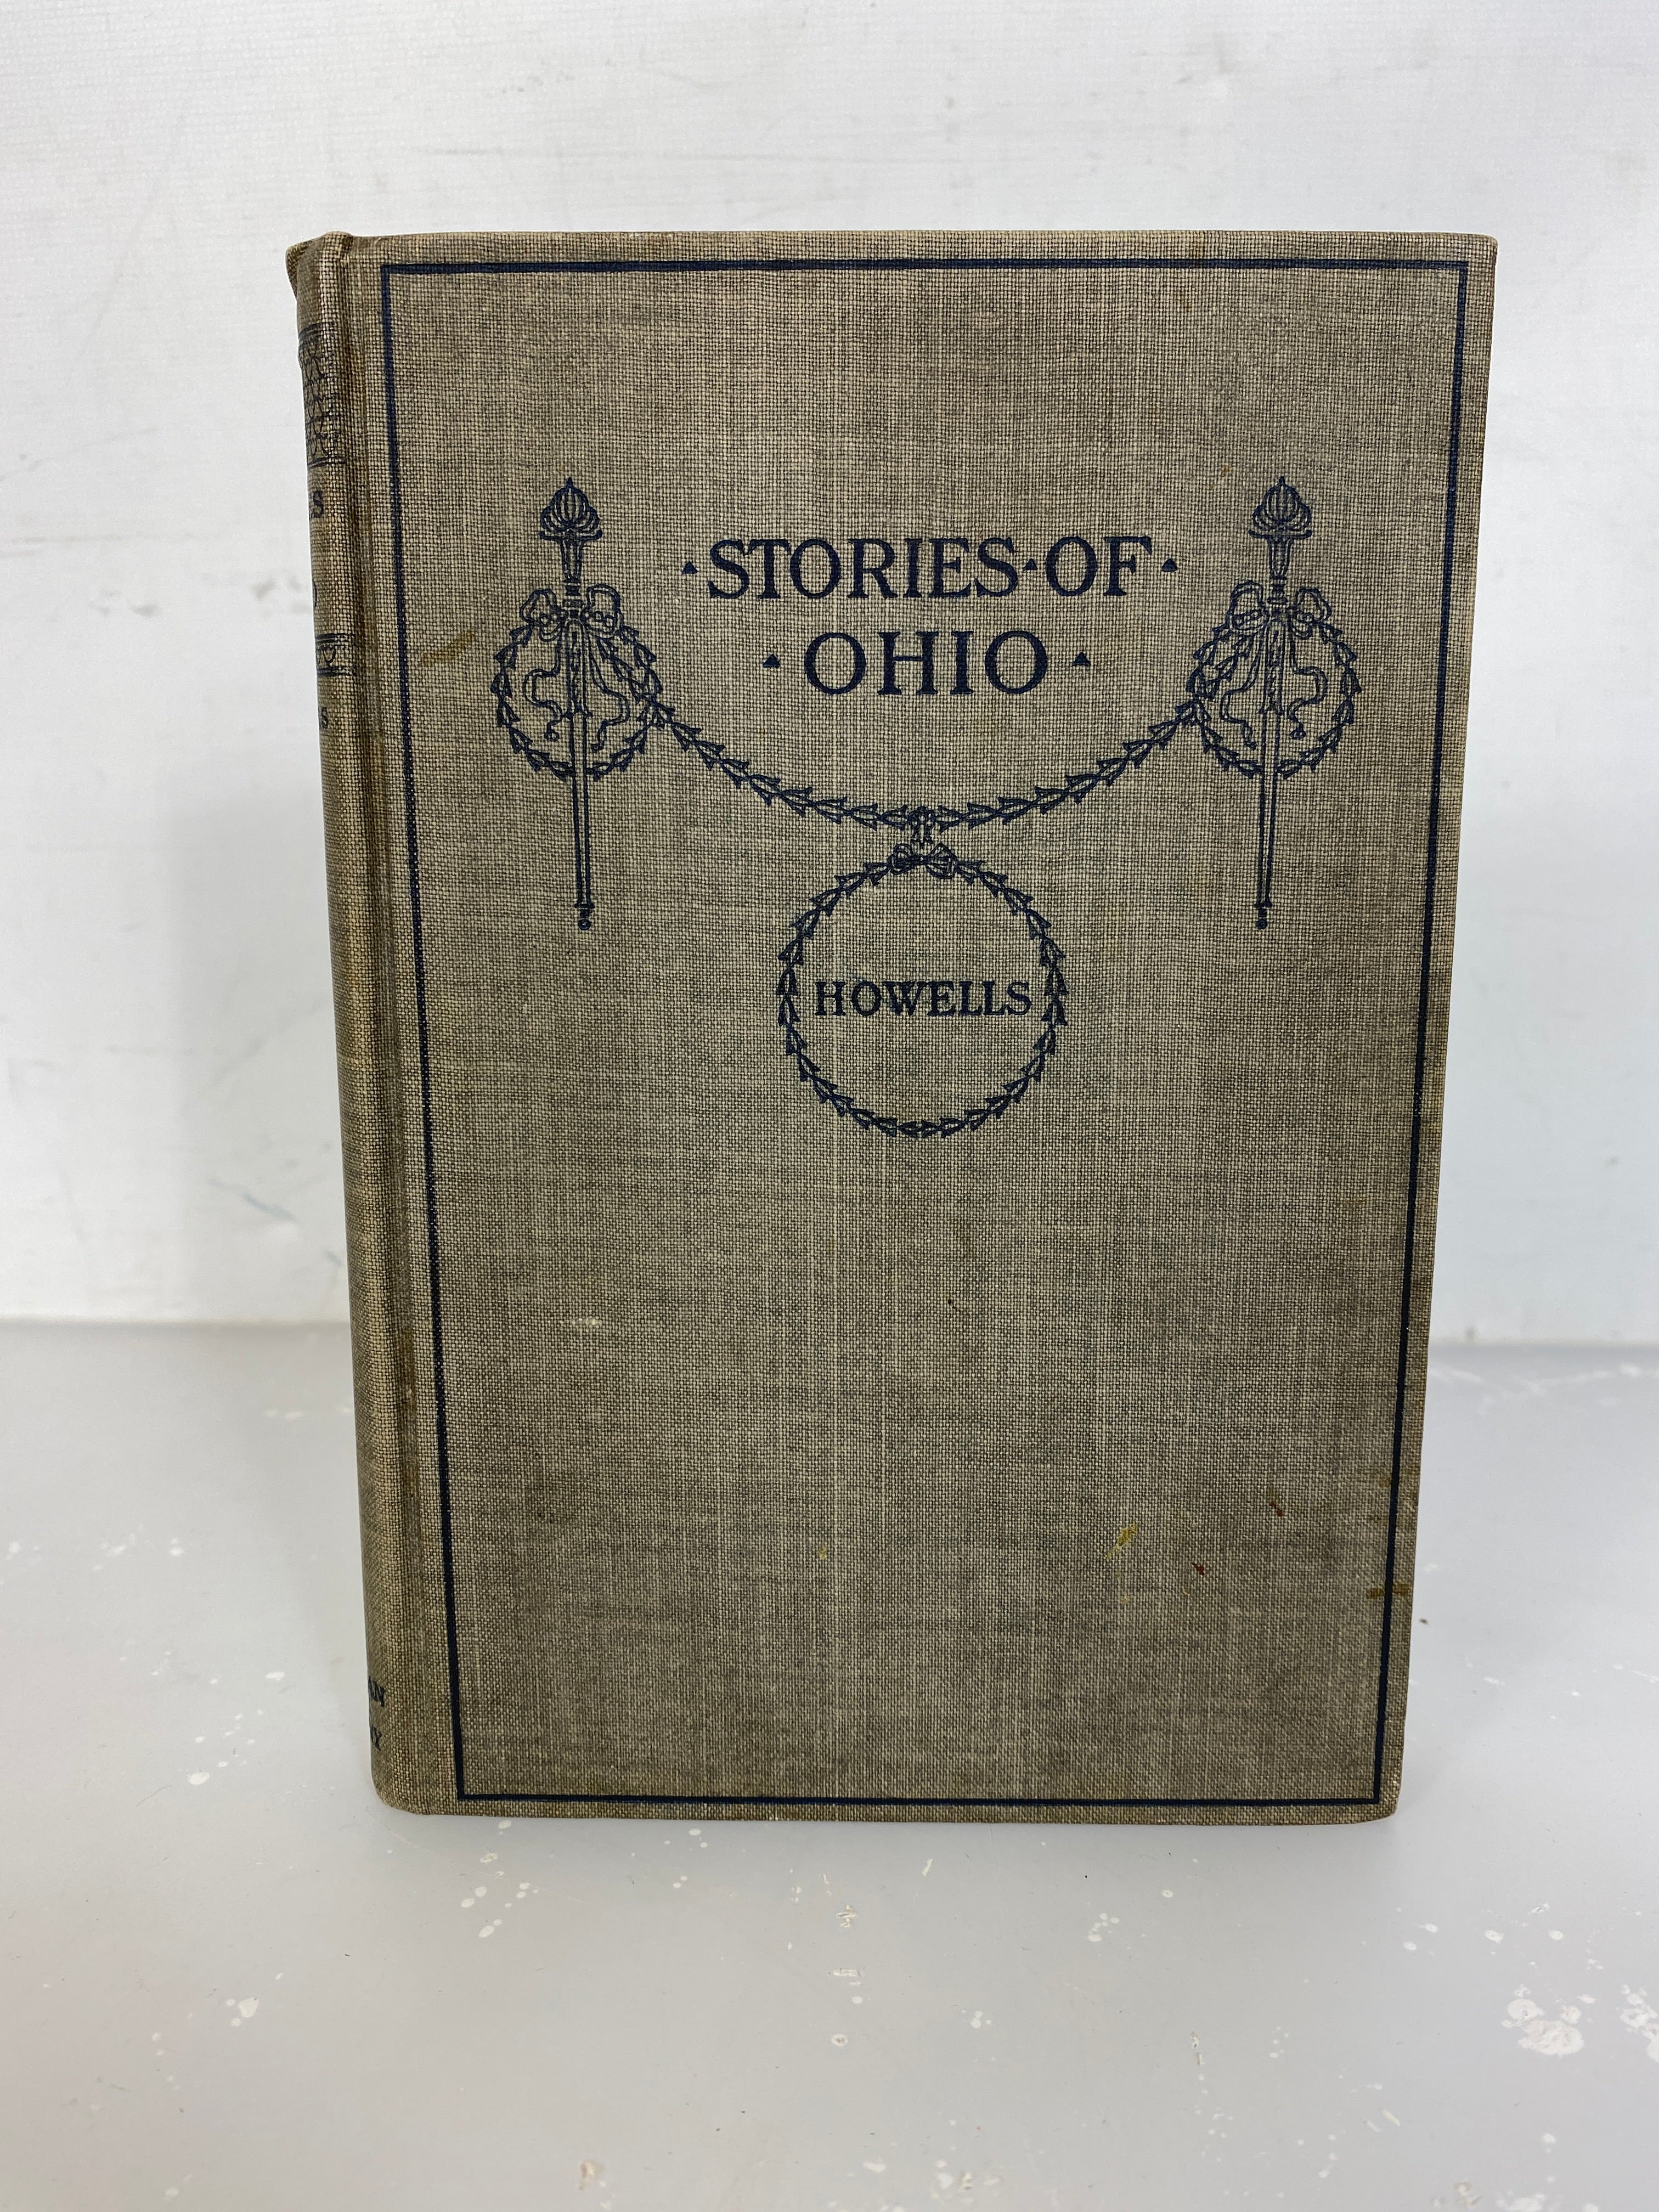 Stories of Ohio by William Dean Howells 1897 American Book Company HC